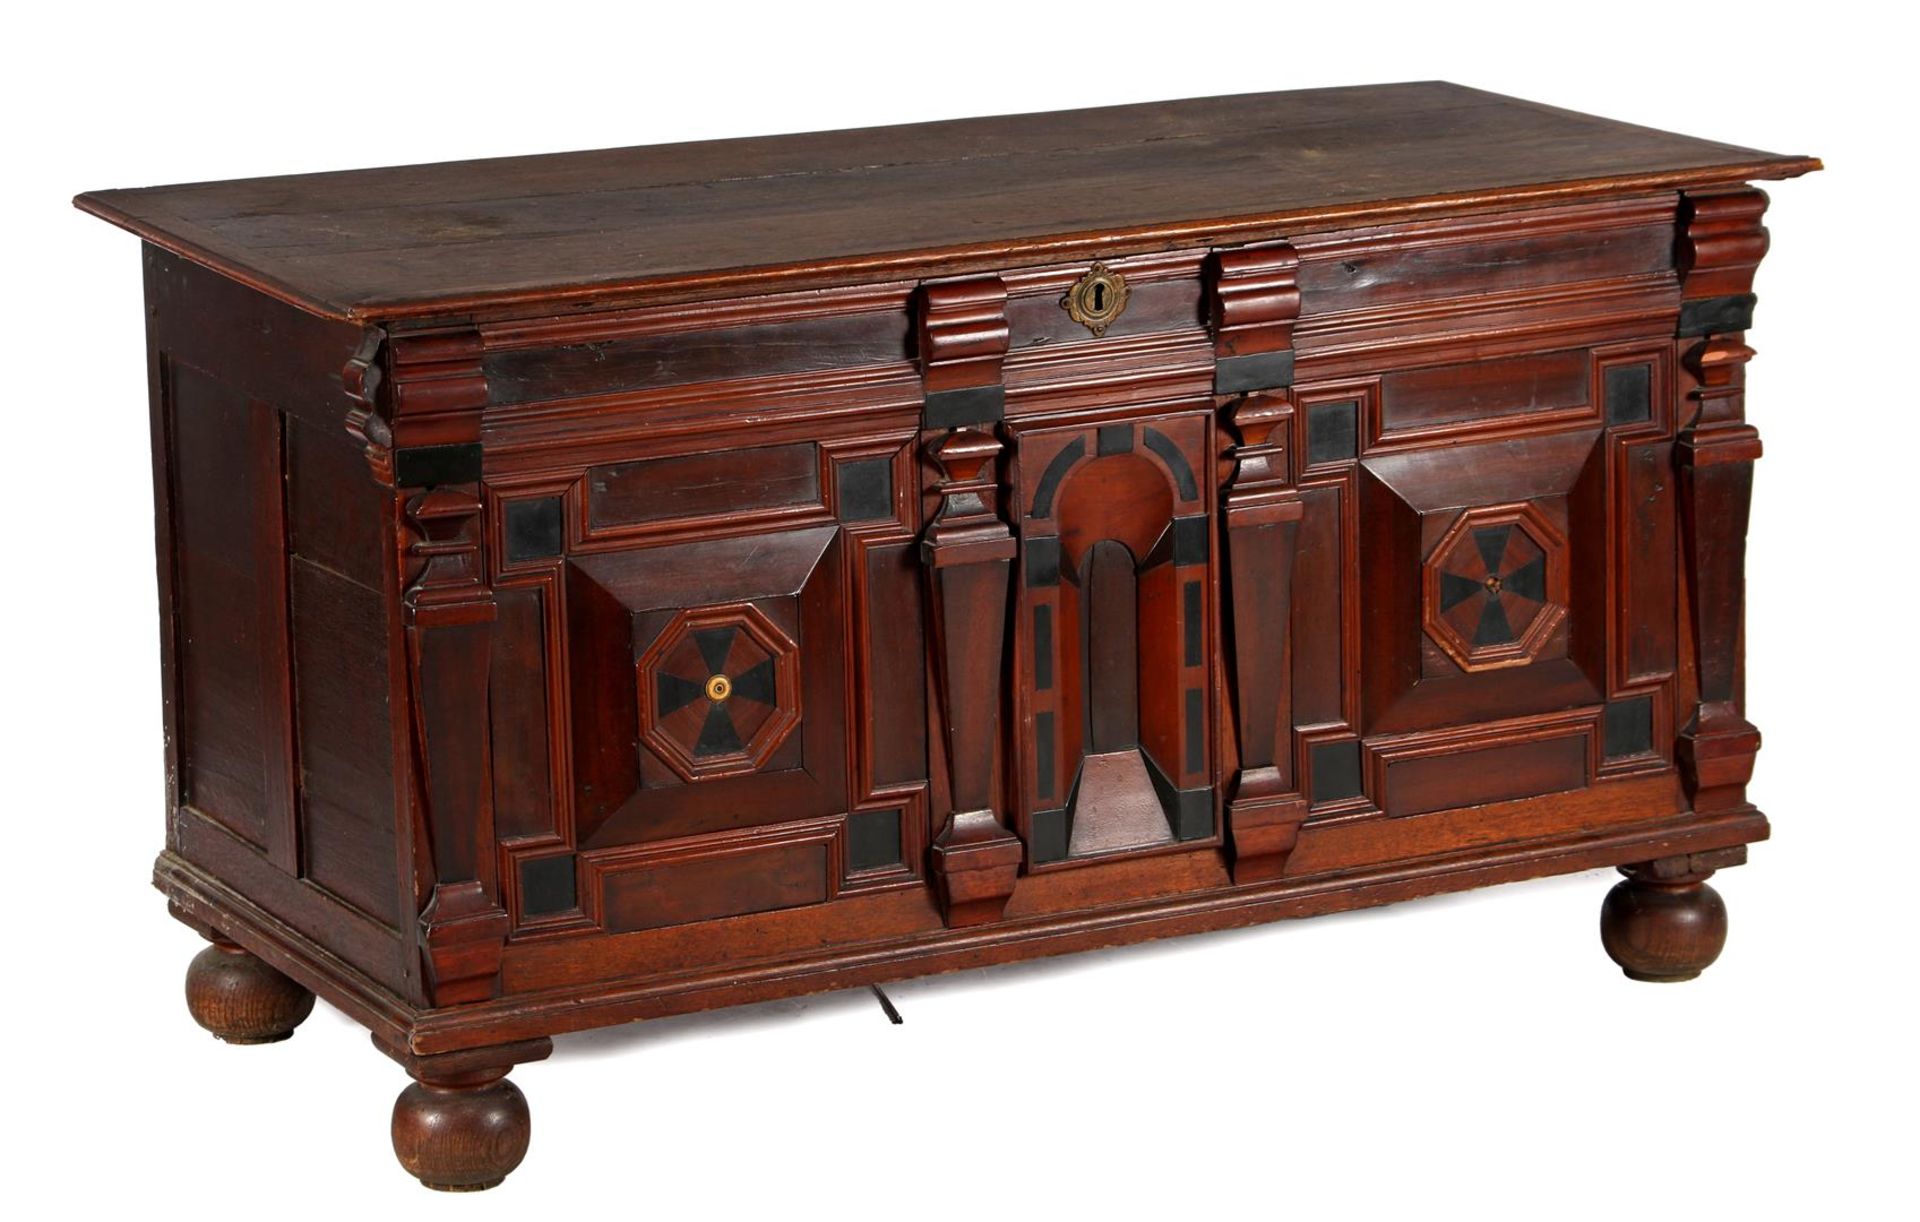 Oak blanket chest with walnut veneer front with marquetry decoration